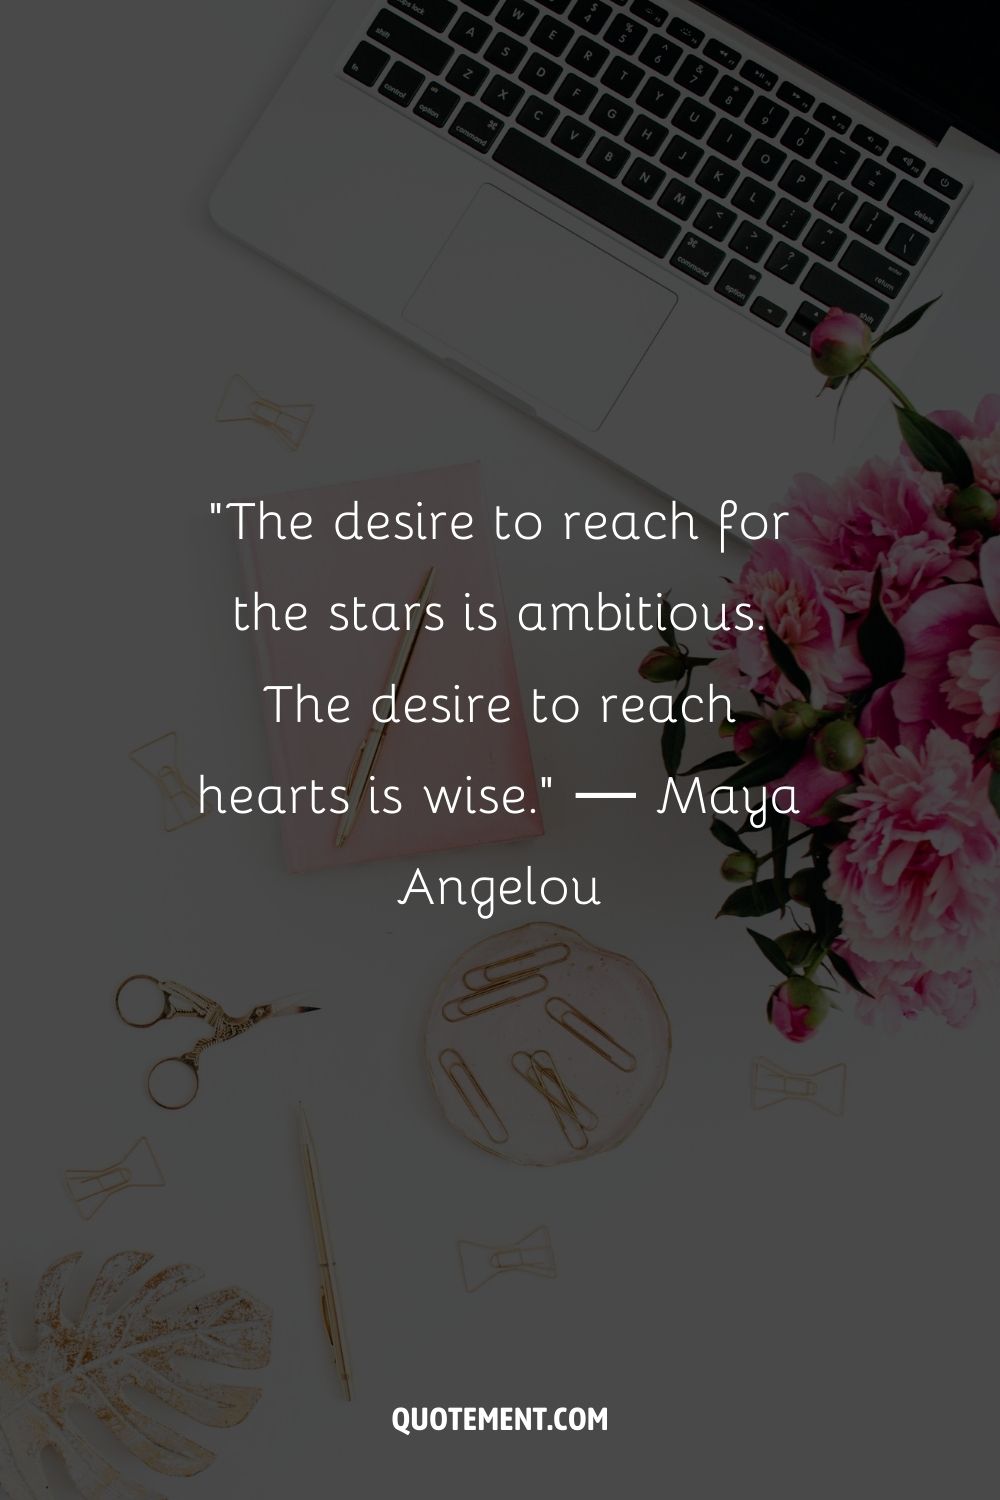 “The desire to reach for the stars is ambitious. The desire to reach hearts is wise.” ― Maya Angelou